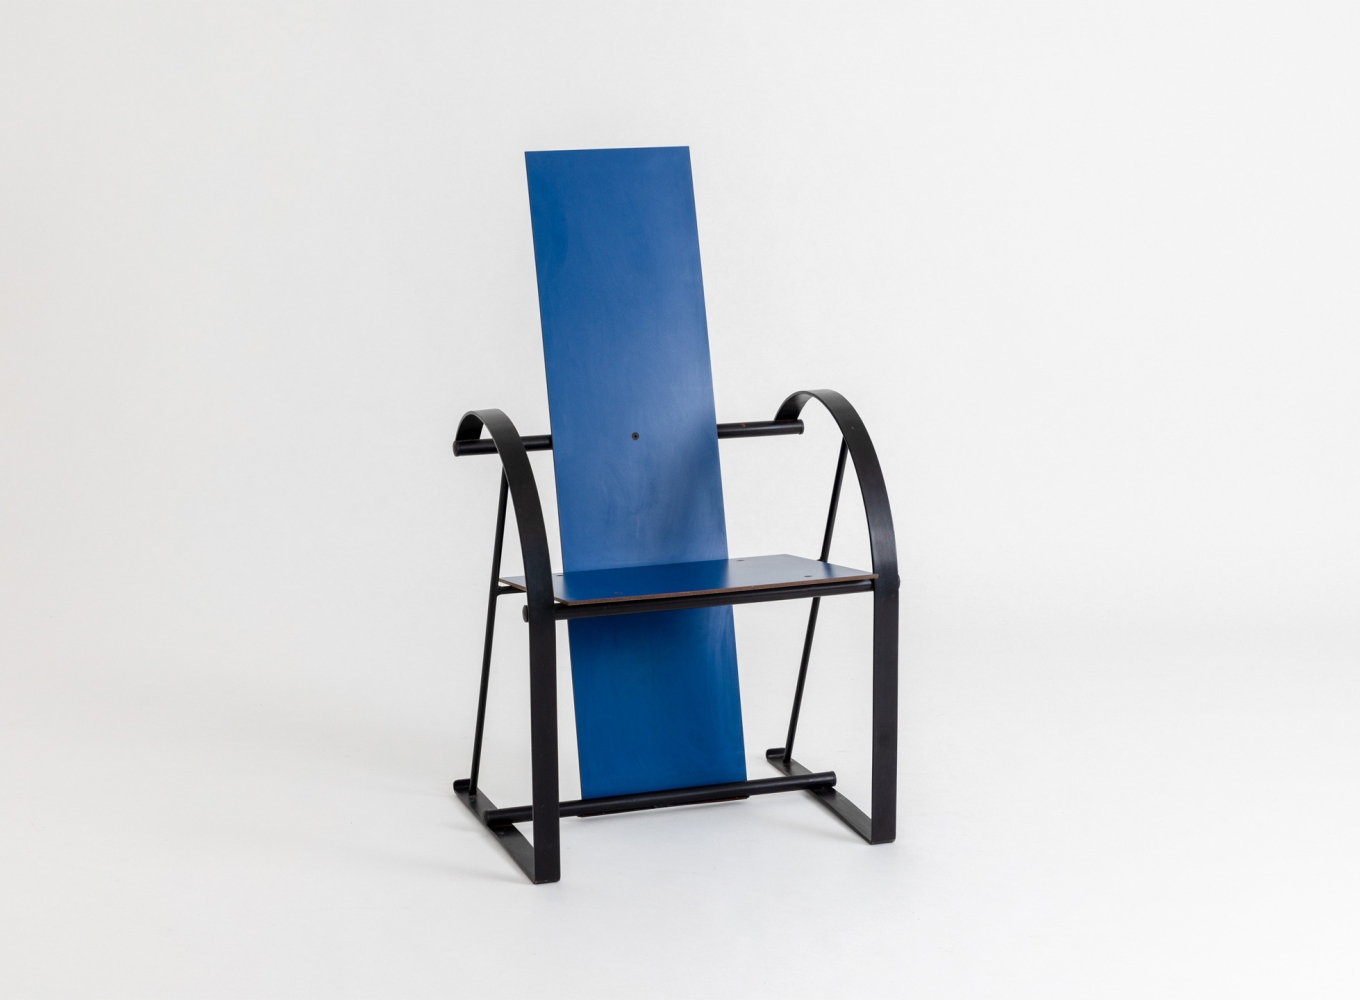 René-Jean Caillette | Pair of Chairs, 1987